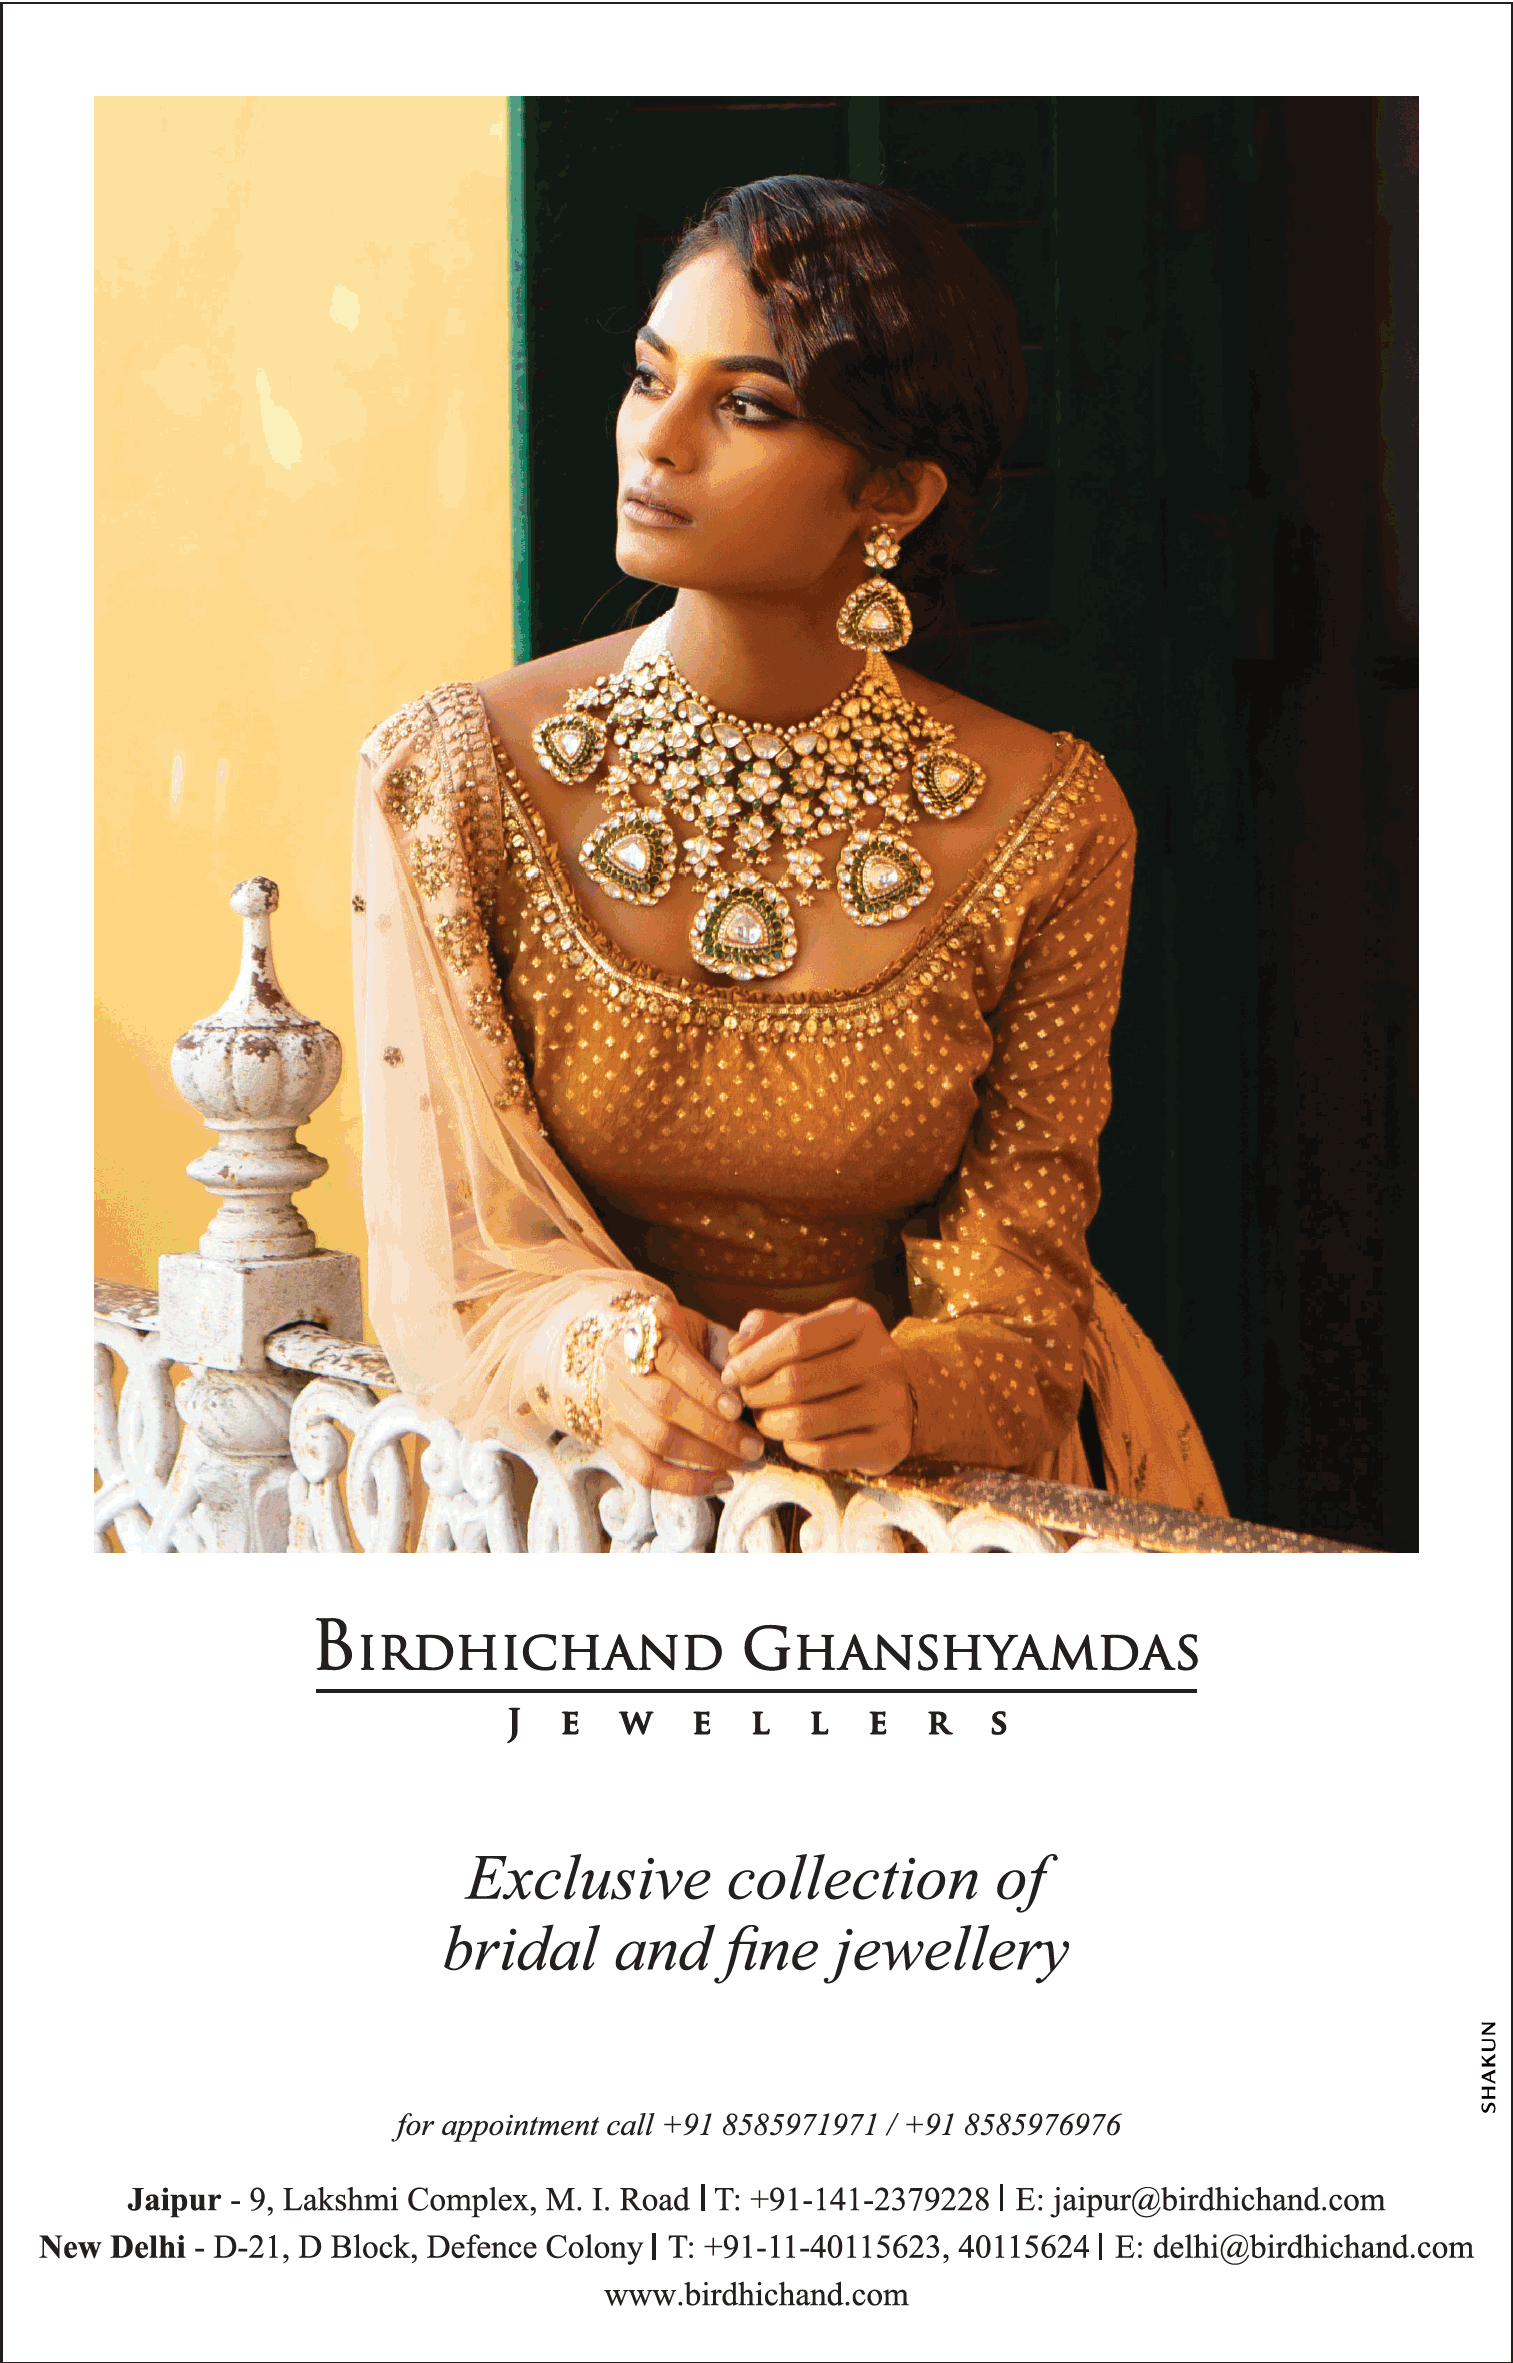 birdhichand-ghanshyamdas-jewellers-exclusive-collection-of-bridal-and-fine-jewellery-ad-times-of-india-jaipur-10-7-2021